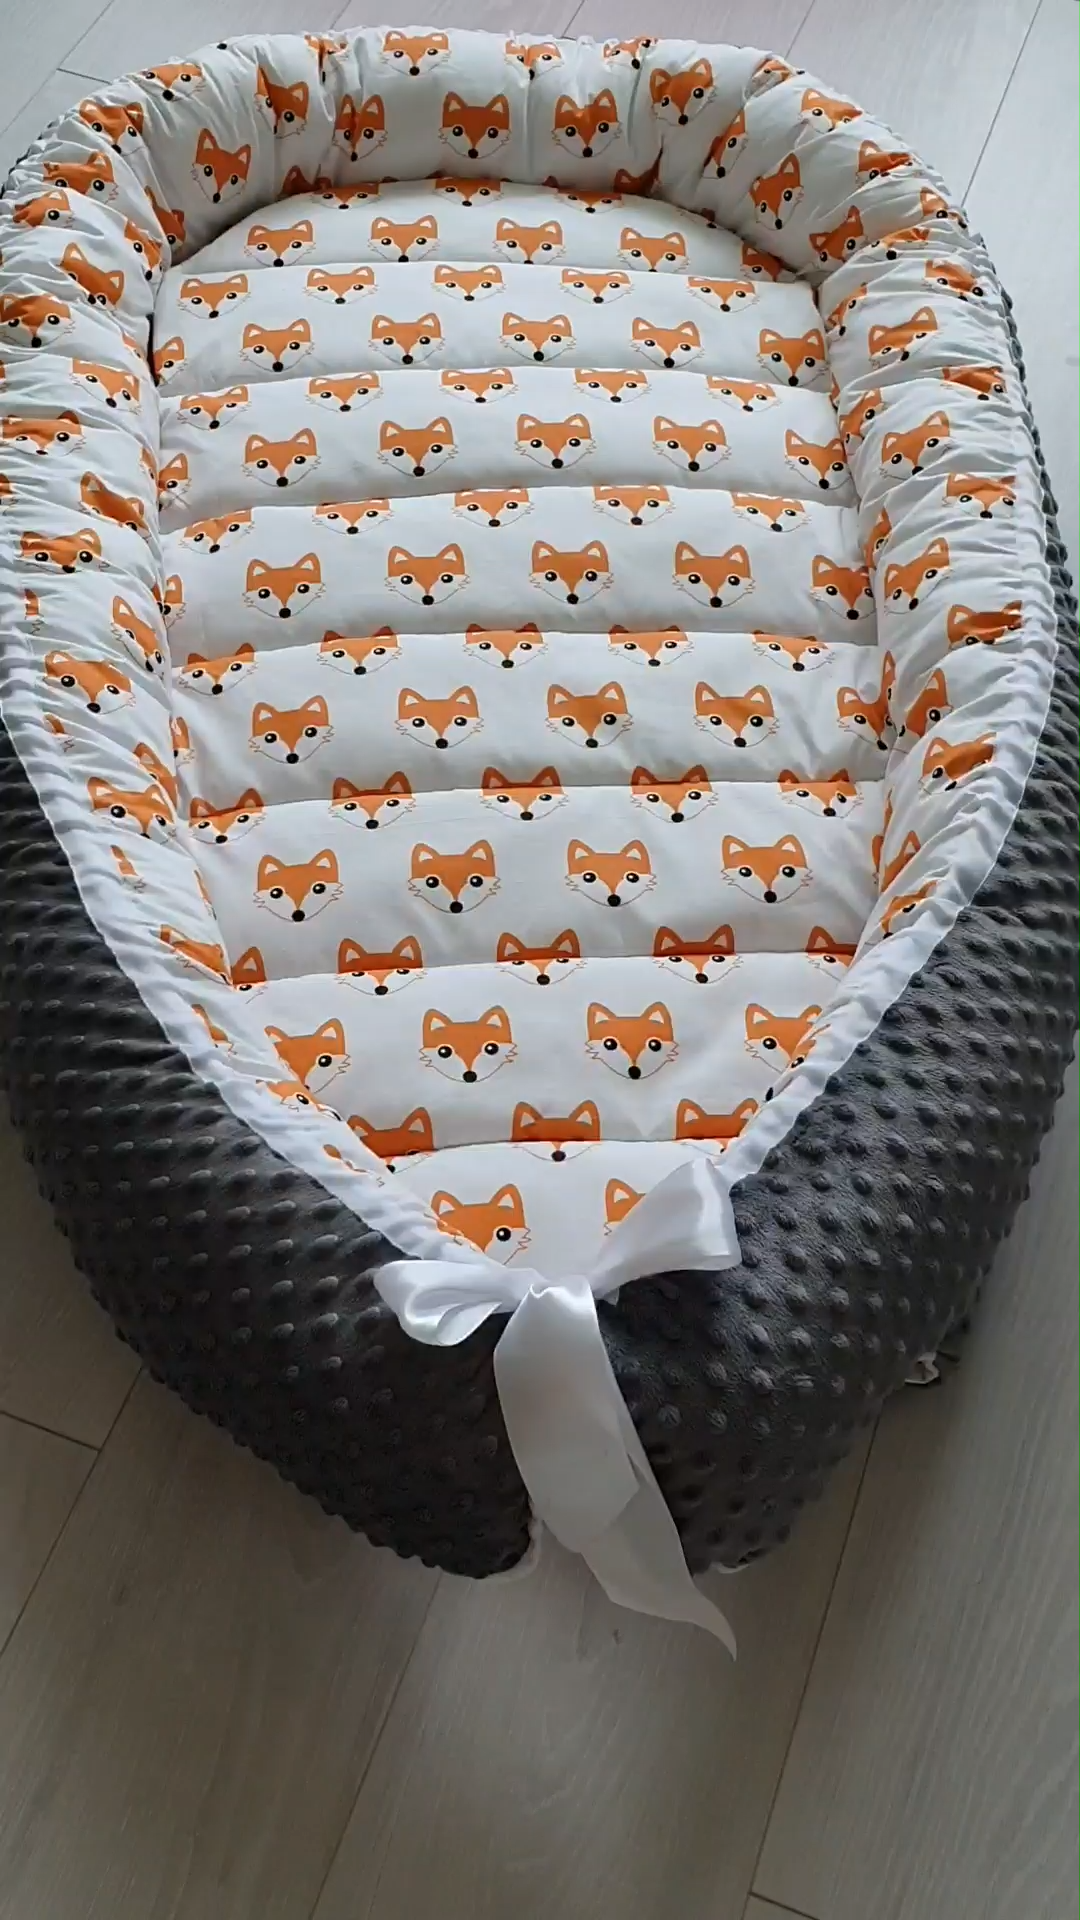 Toddler nest bed Sleeping bed Baby fox print Babynest Snuggle bed Cosleeper Travel bed Baby bedding - Toddler nest bed Sleeping bed Baby fox print Babynest Snuggle bed Cosleeper Travel bed Baby bedding -   16 diy Baby bed ideas